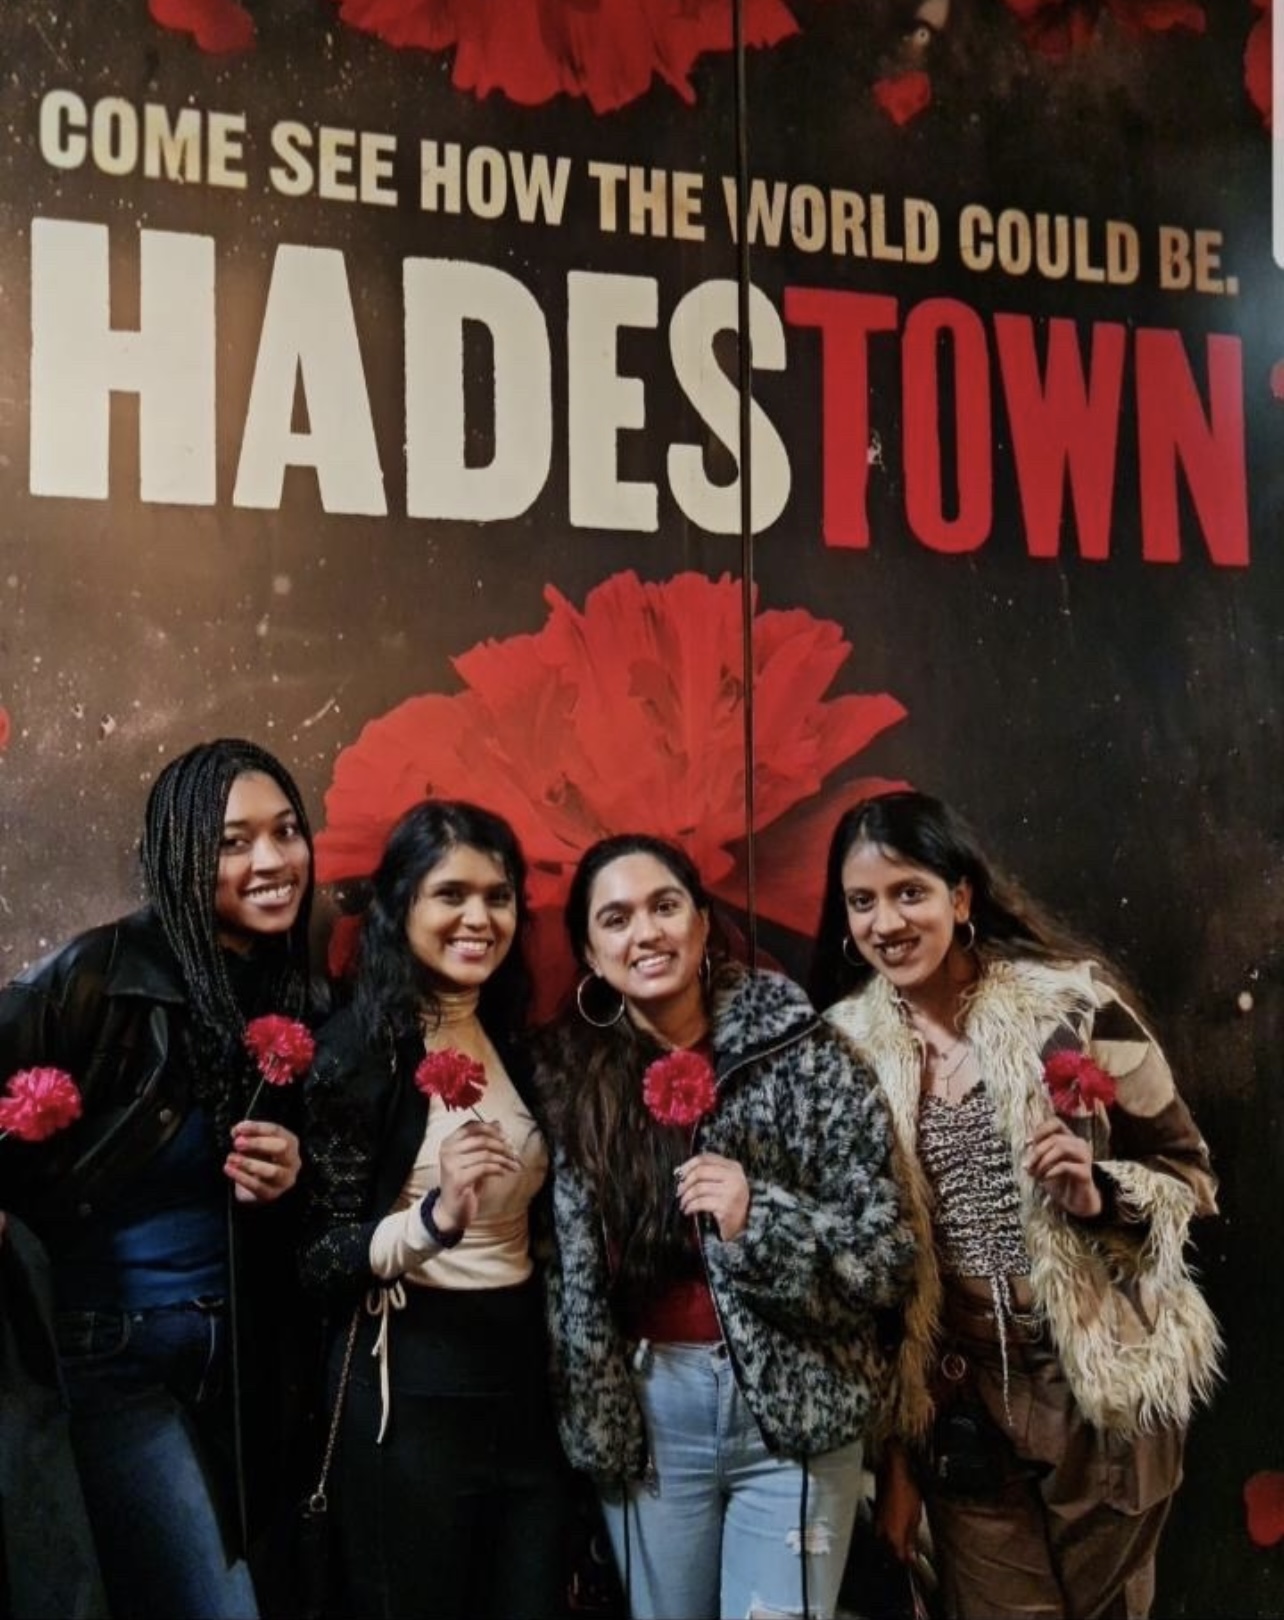 The author and some friends hold flowers and pose in front of a “Hadestown” poster.